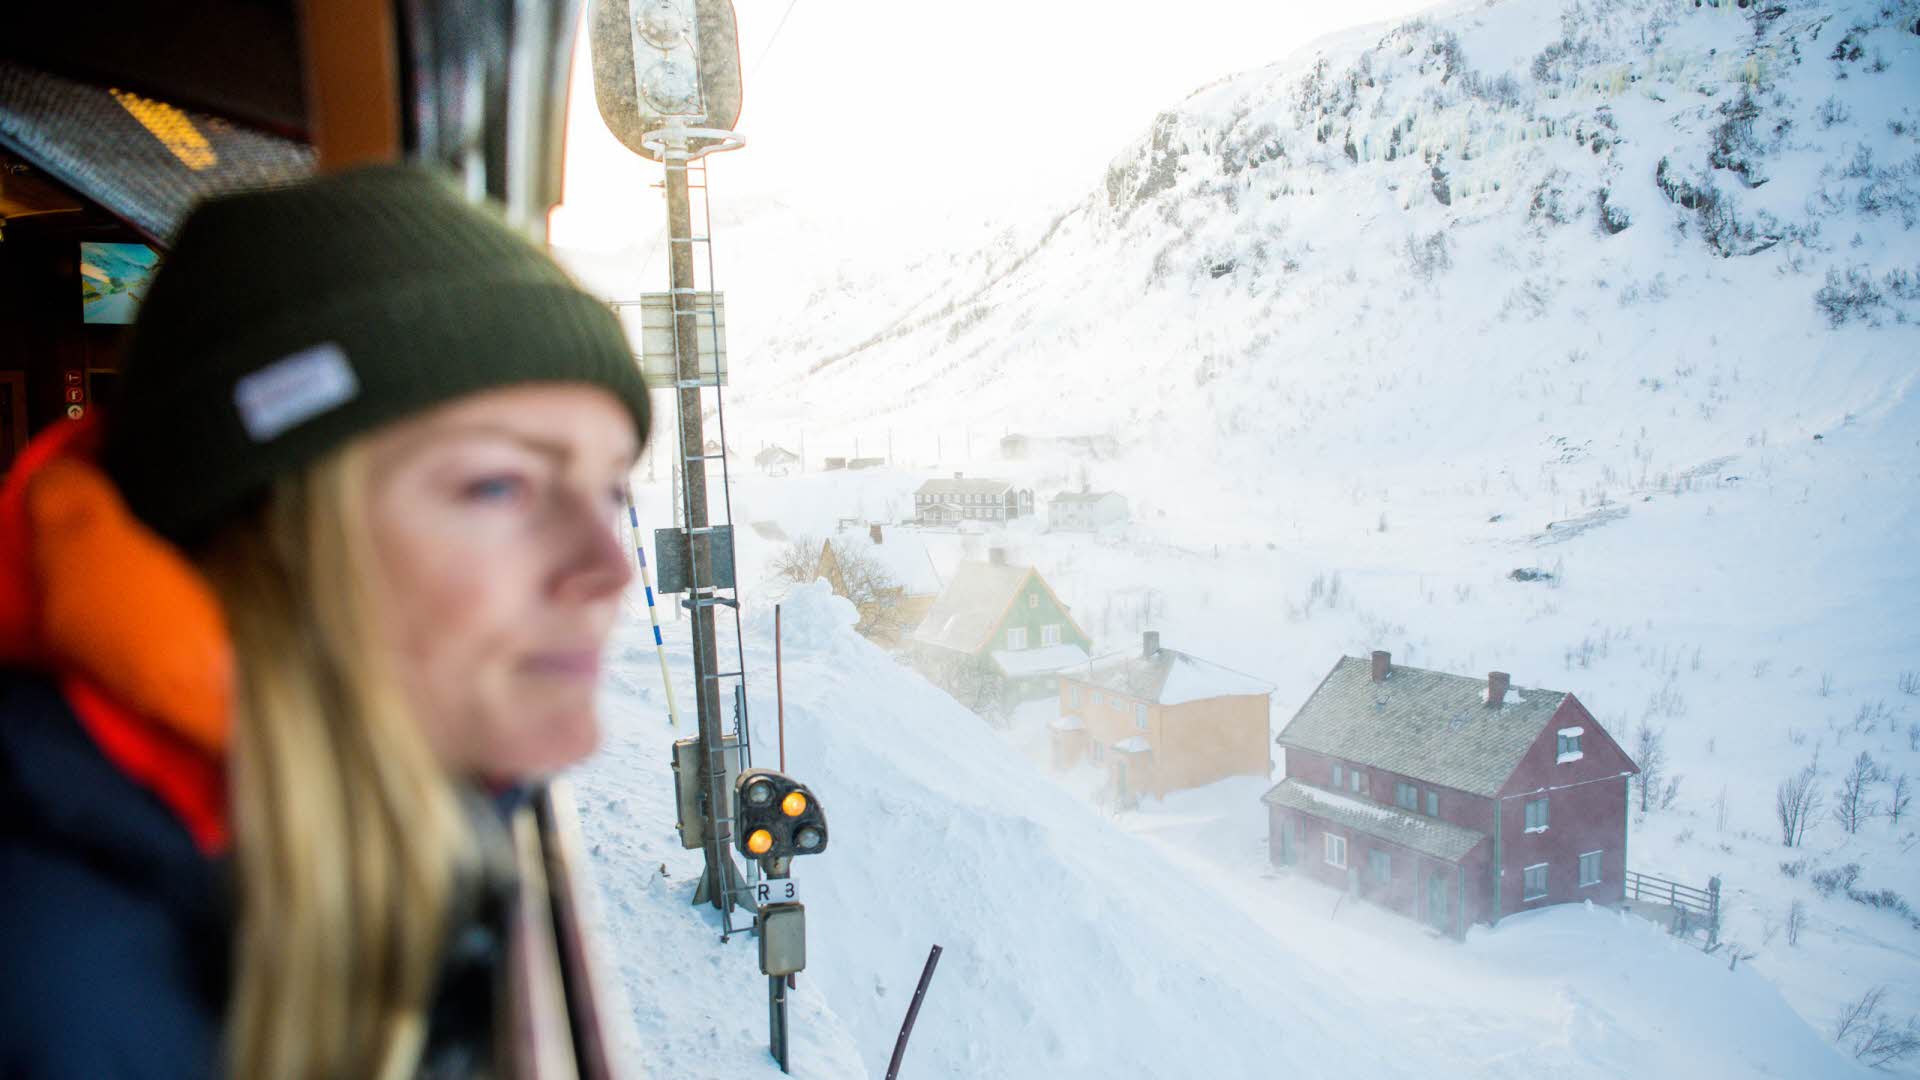 A woman wearing a hat looking out of the window on the Flåm railway near houses in a winter landscape.